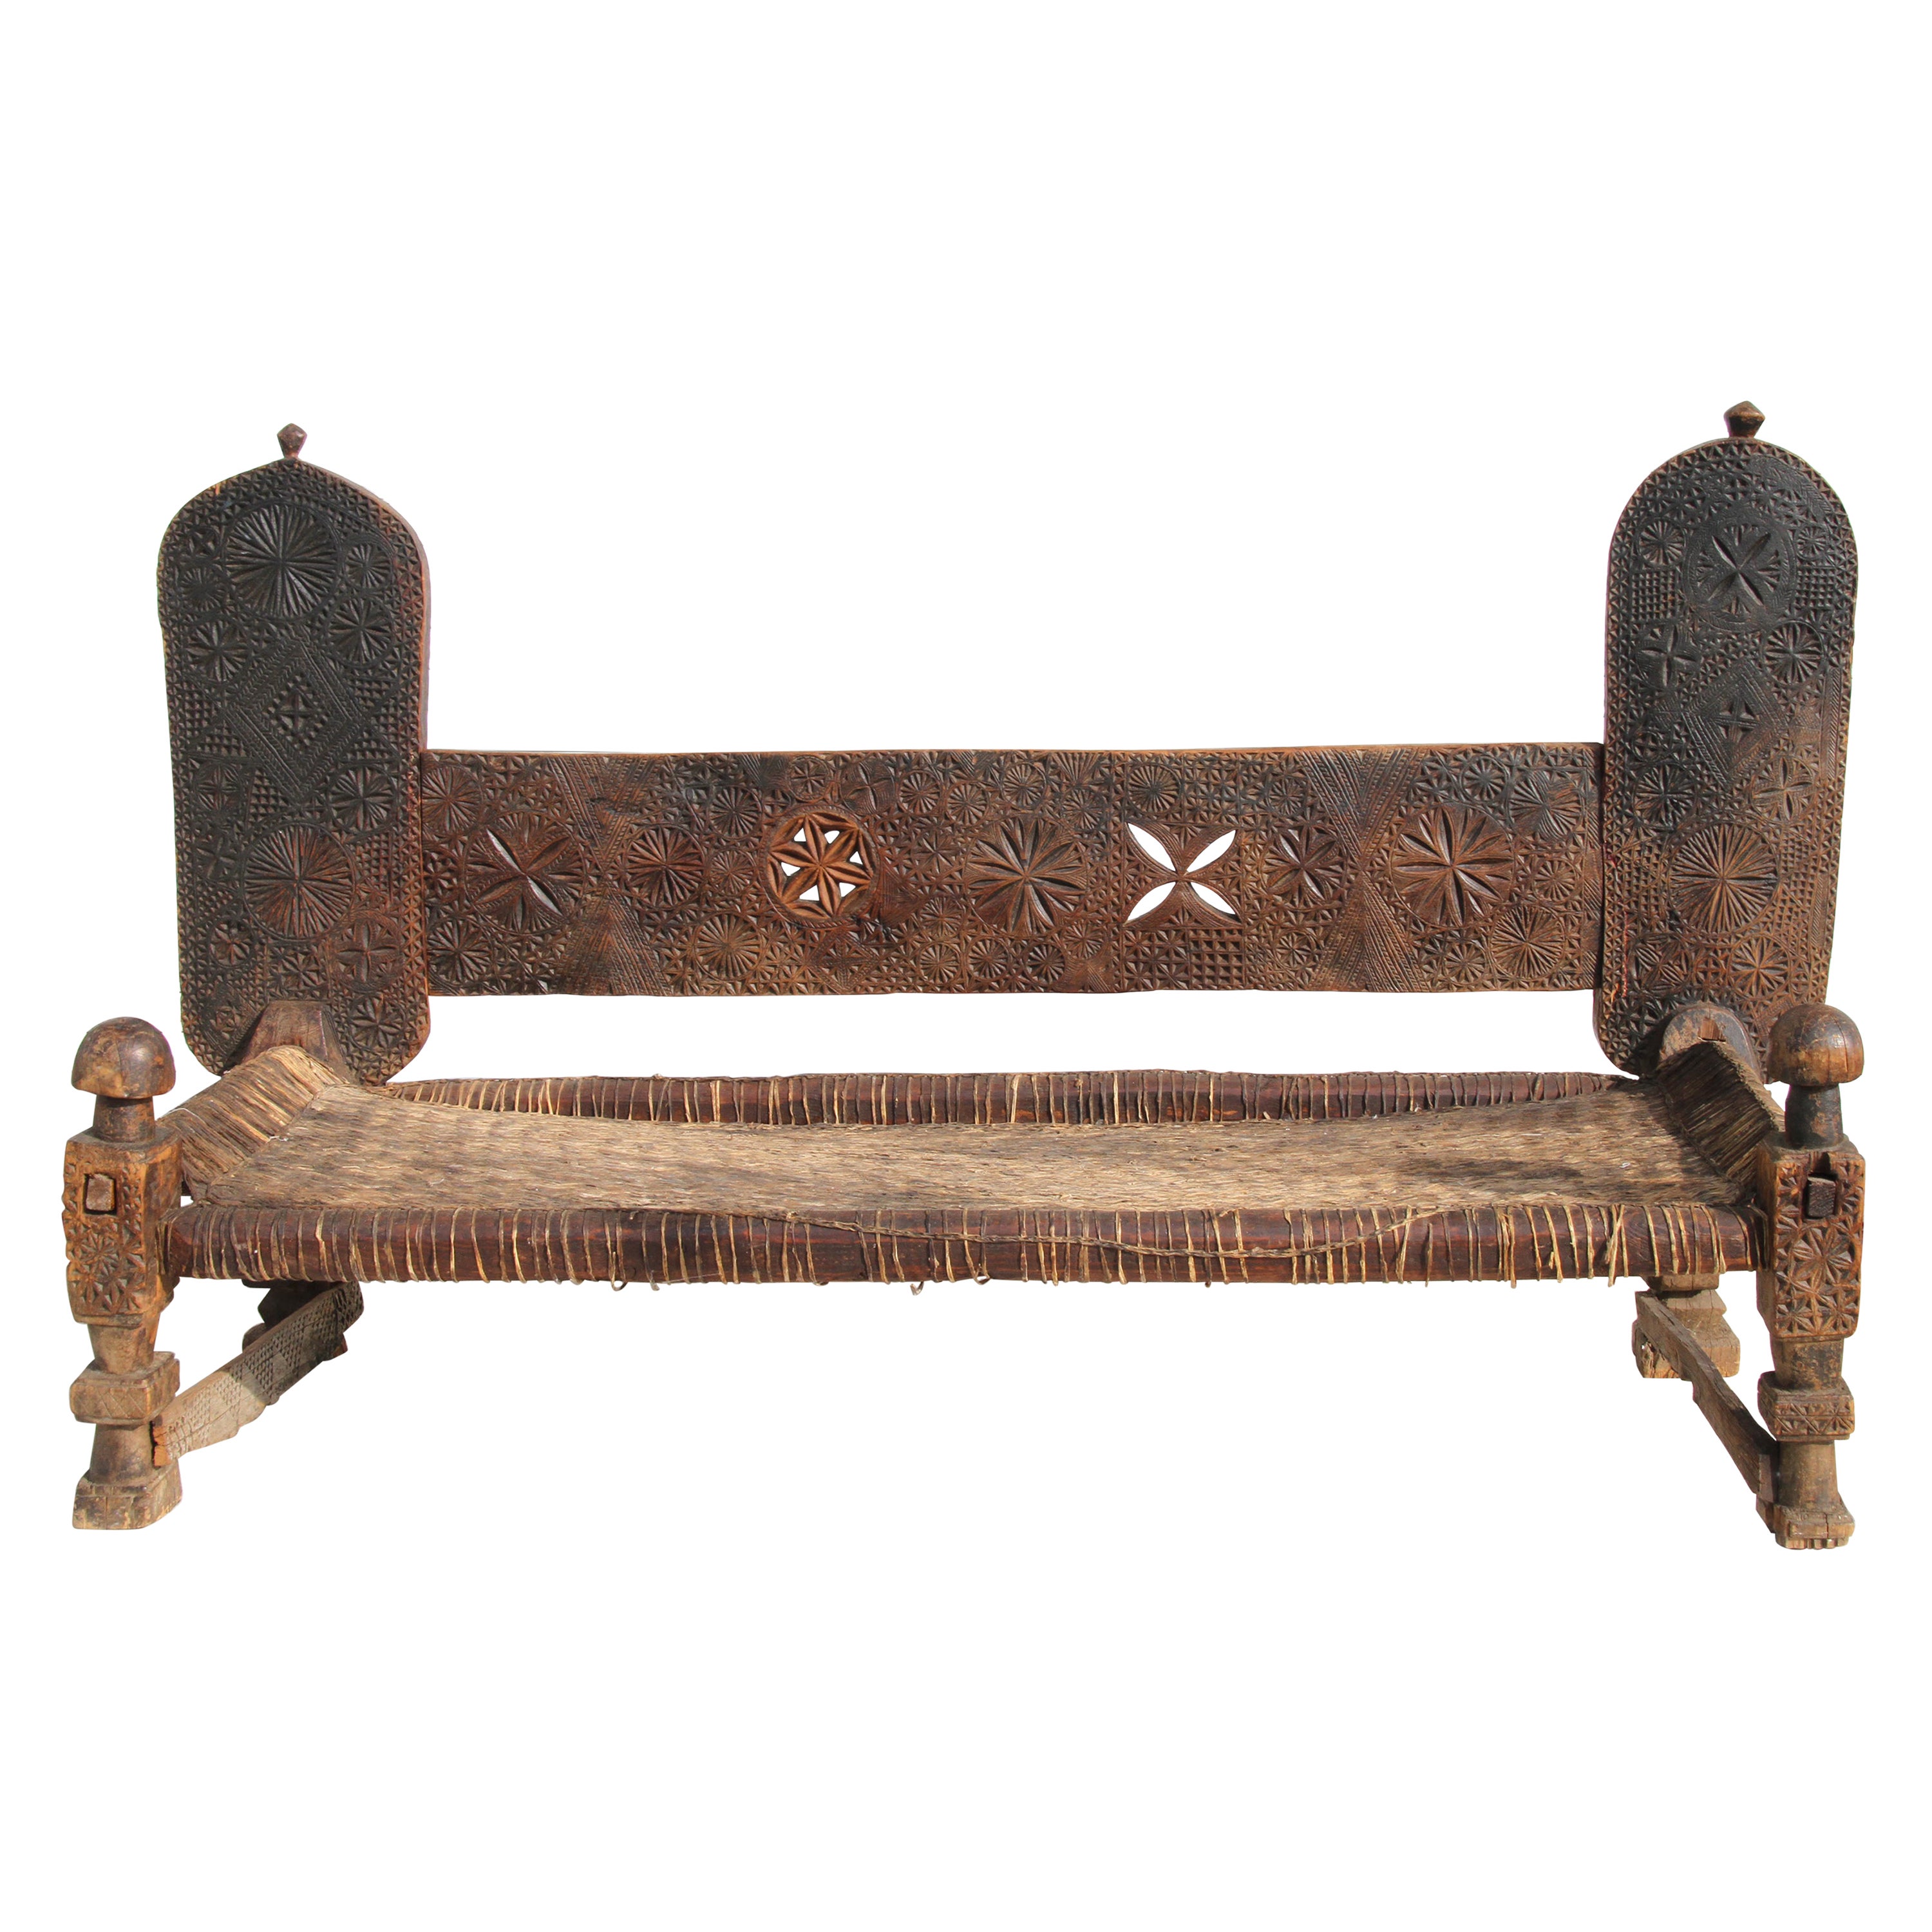  Antique 19th Century Swat Valley Charpoi Bench For Sale